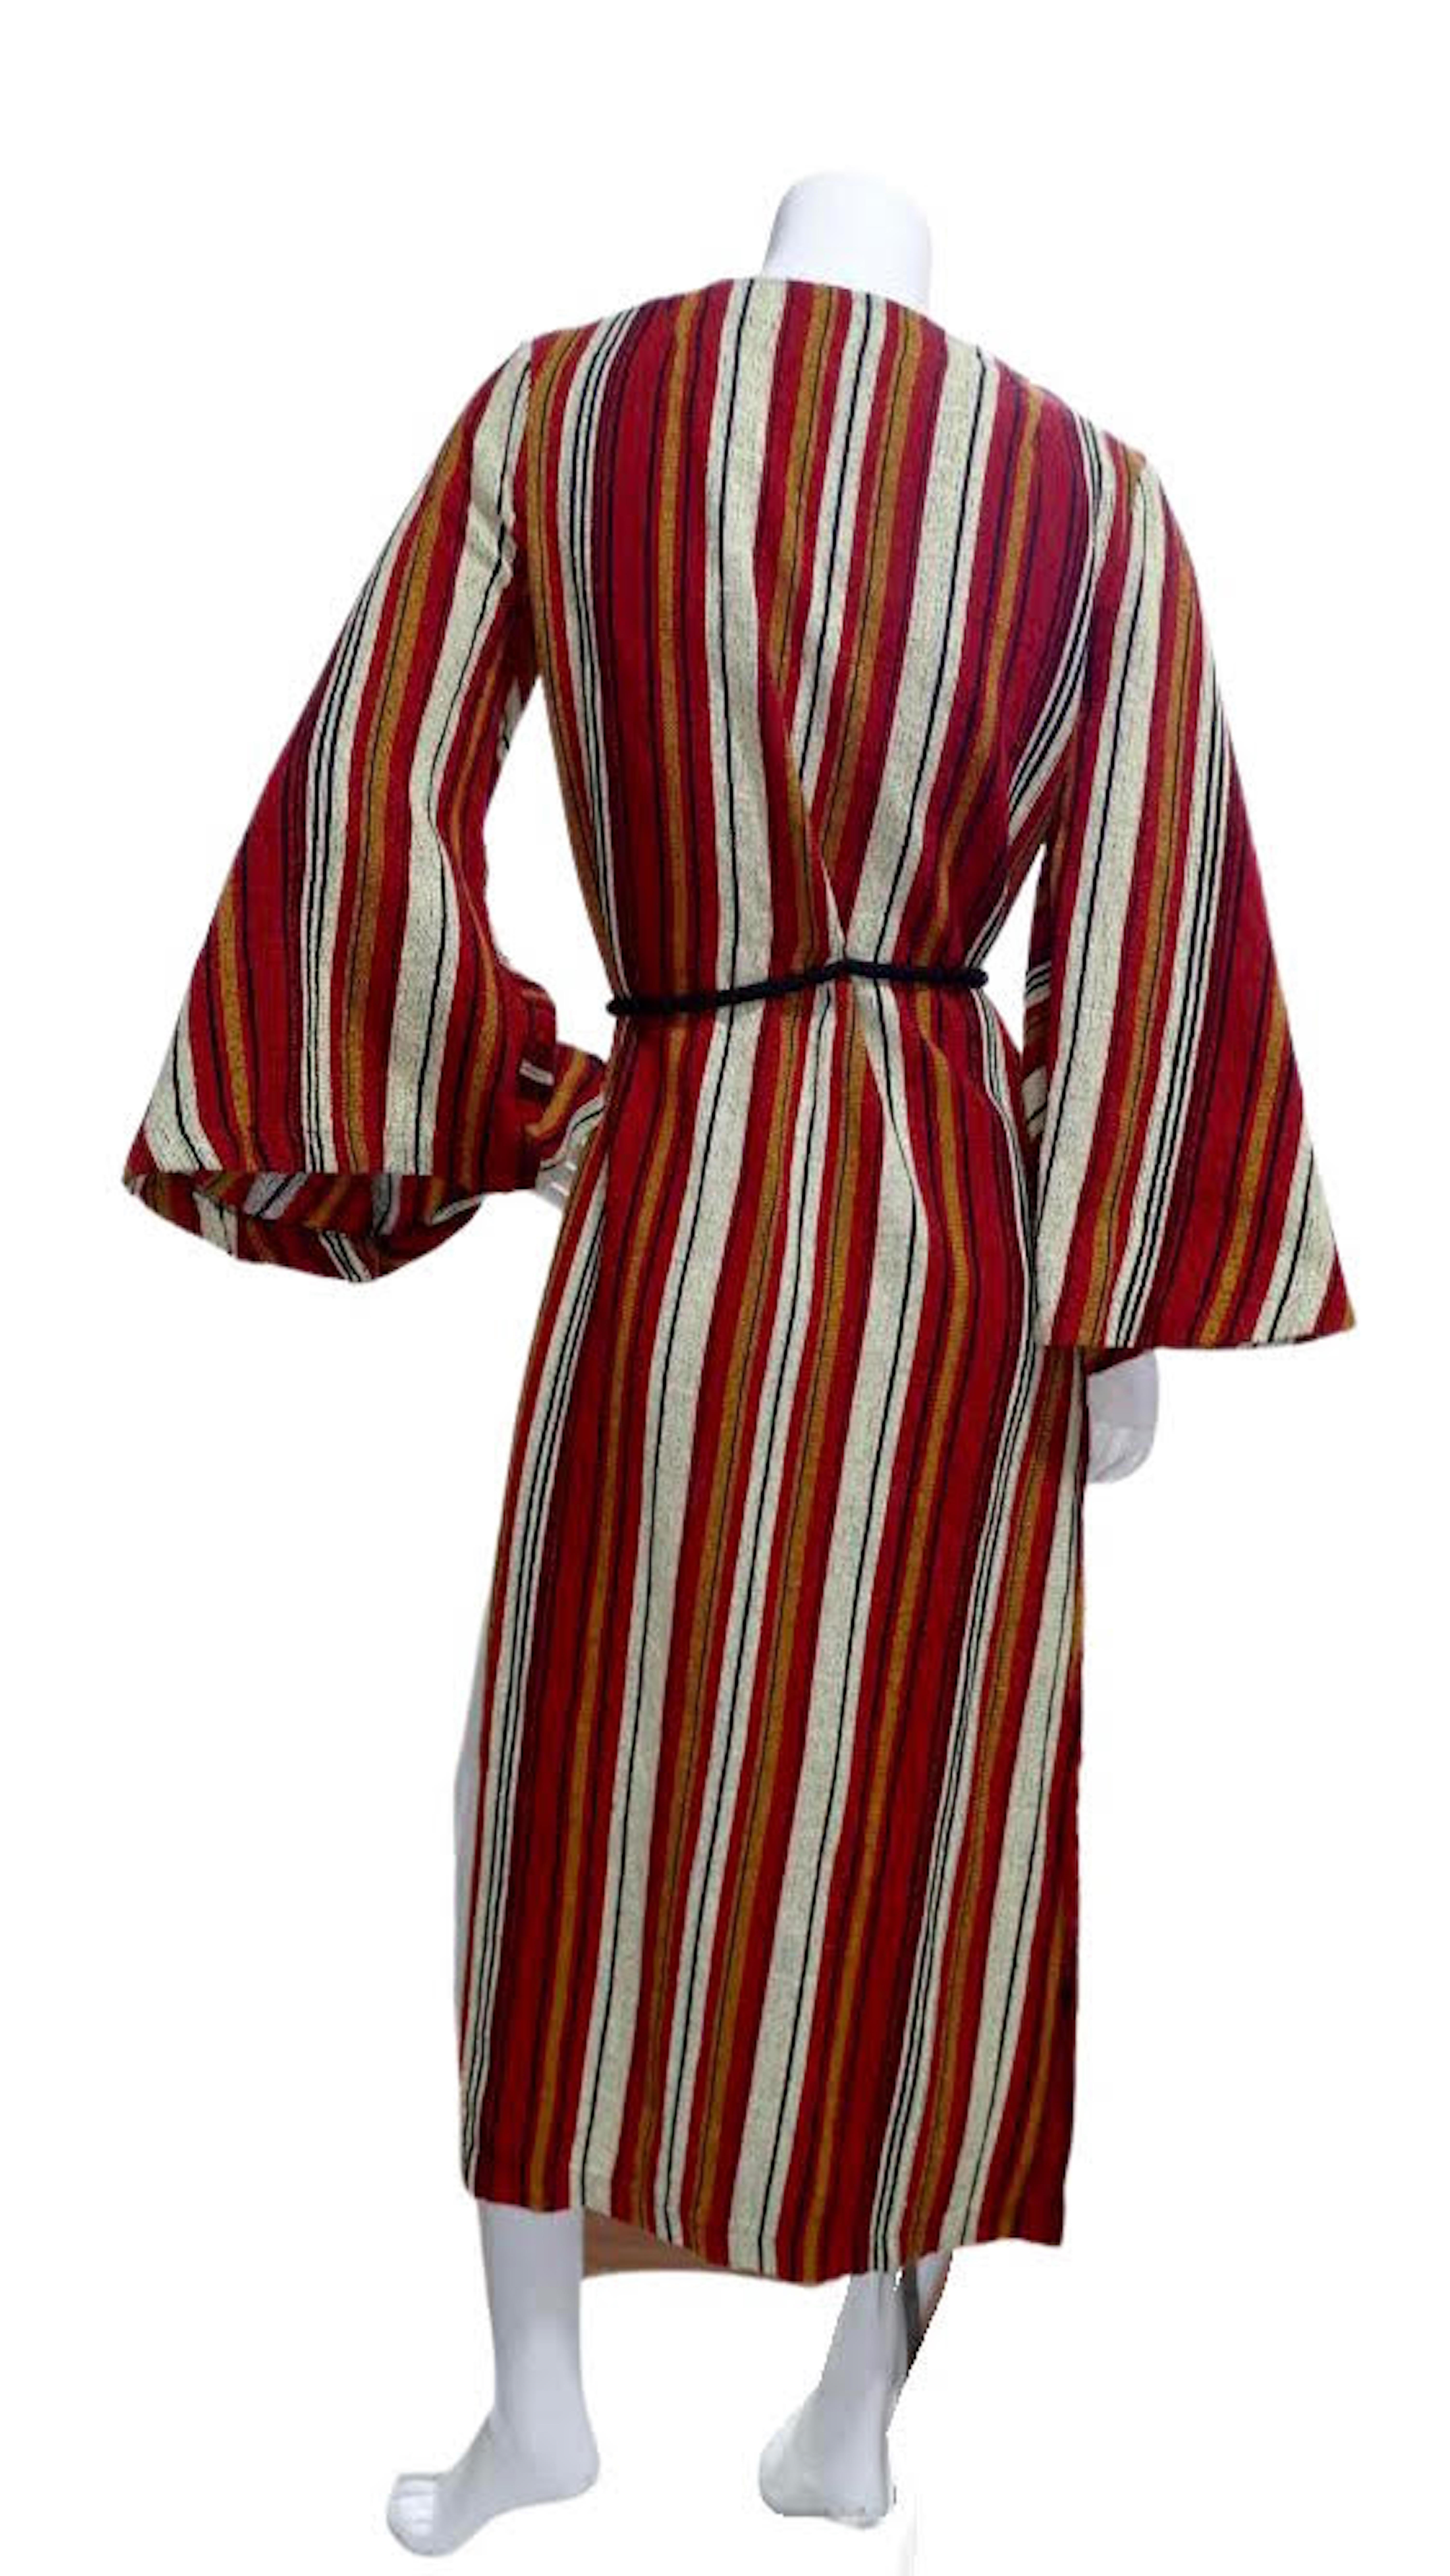 We're falling in love with Israeli designer Rikma- and you will too with our amazing 1970s dress! Made of a thick woven cotton fabric in Rikma's signature striped pattern in shades of red, orange, cream and black; this dress features a deep v-neck,